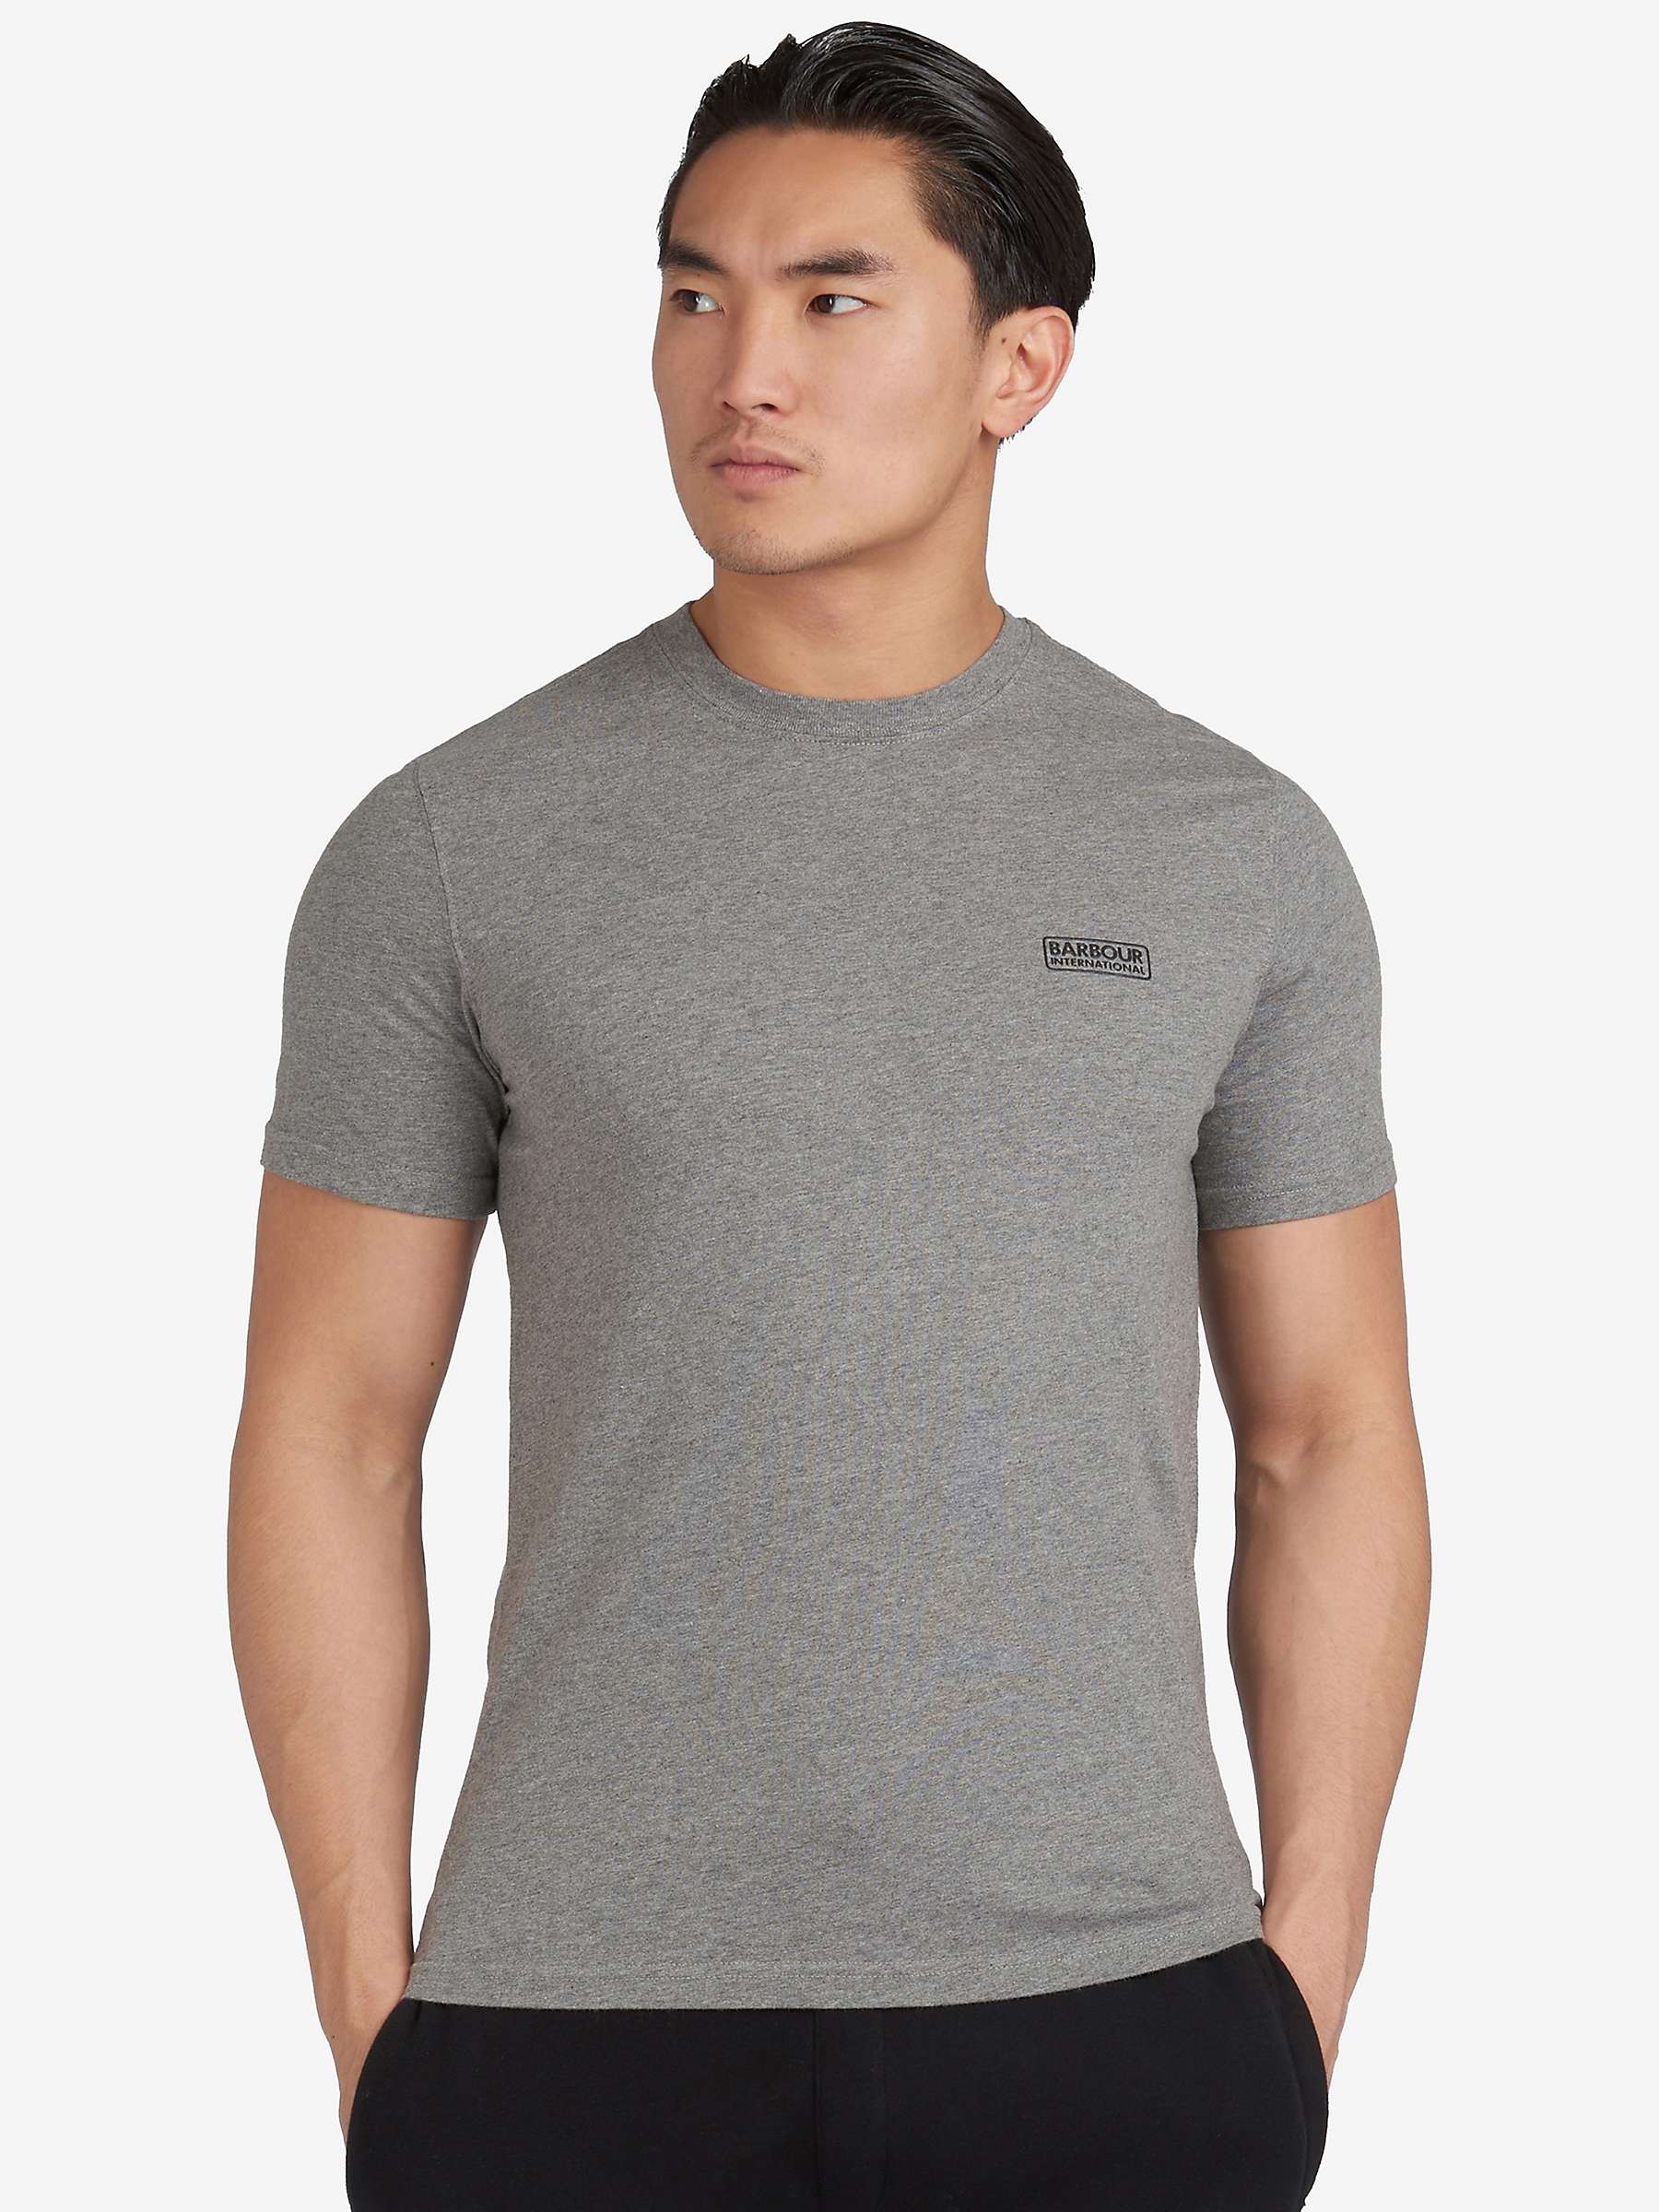 Buy Barbour International Small Logo T-Shirt, Anthracite Marl Online at johnlewis.com